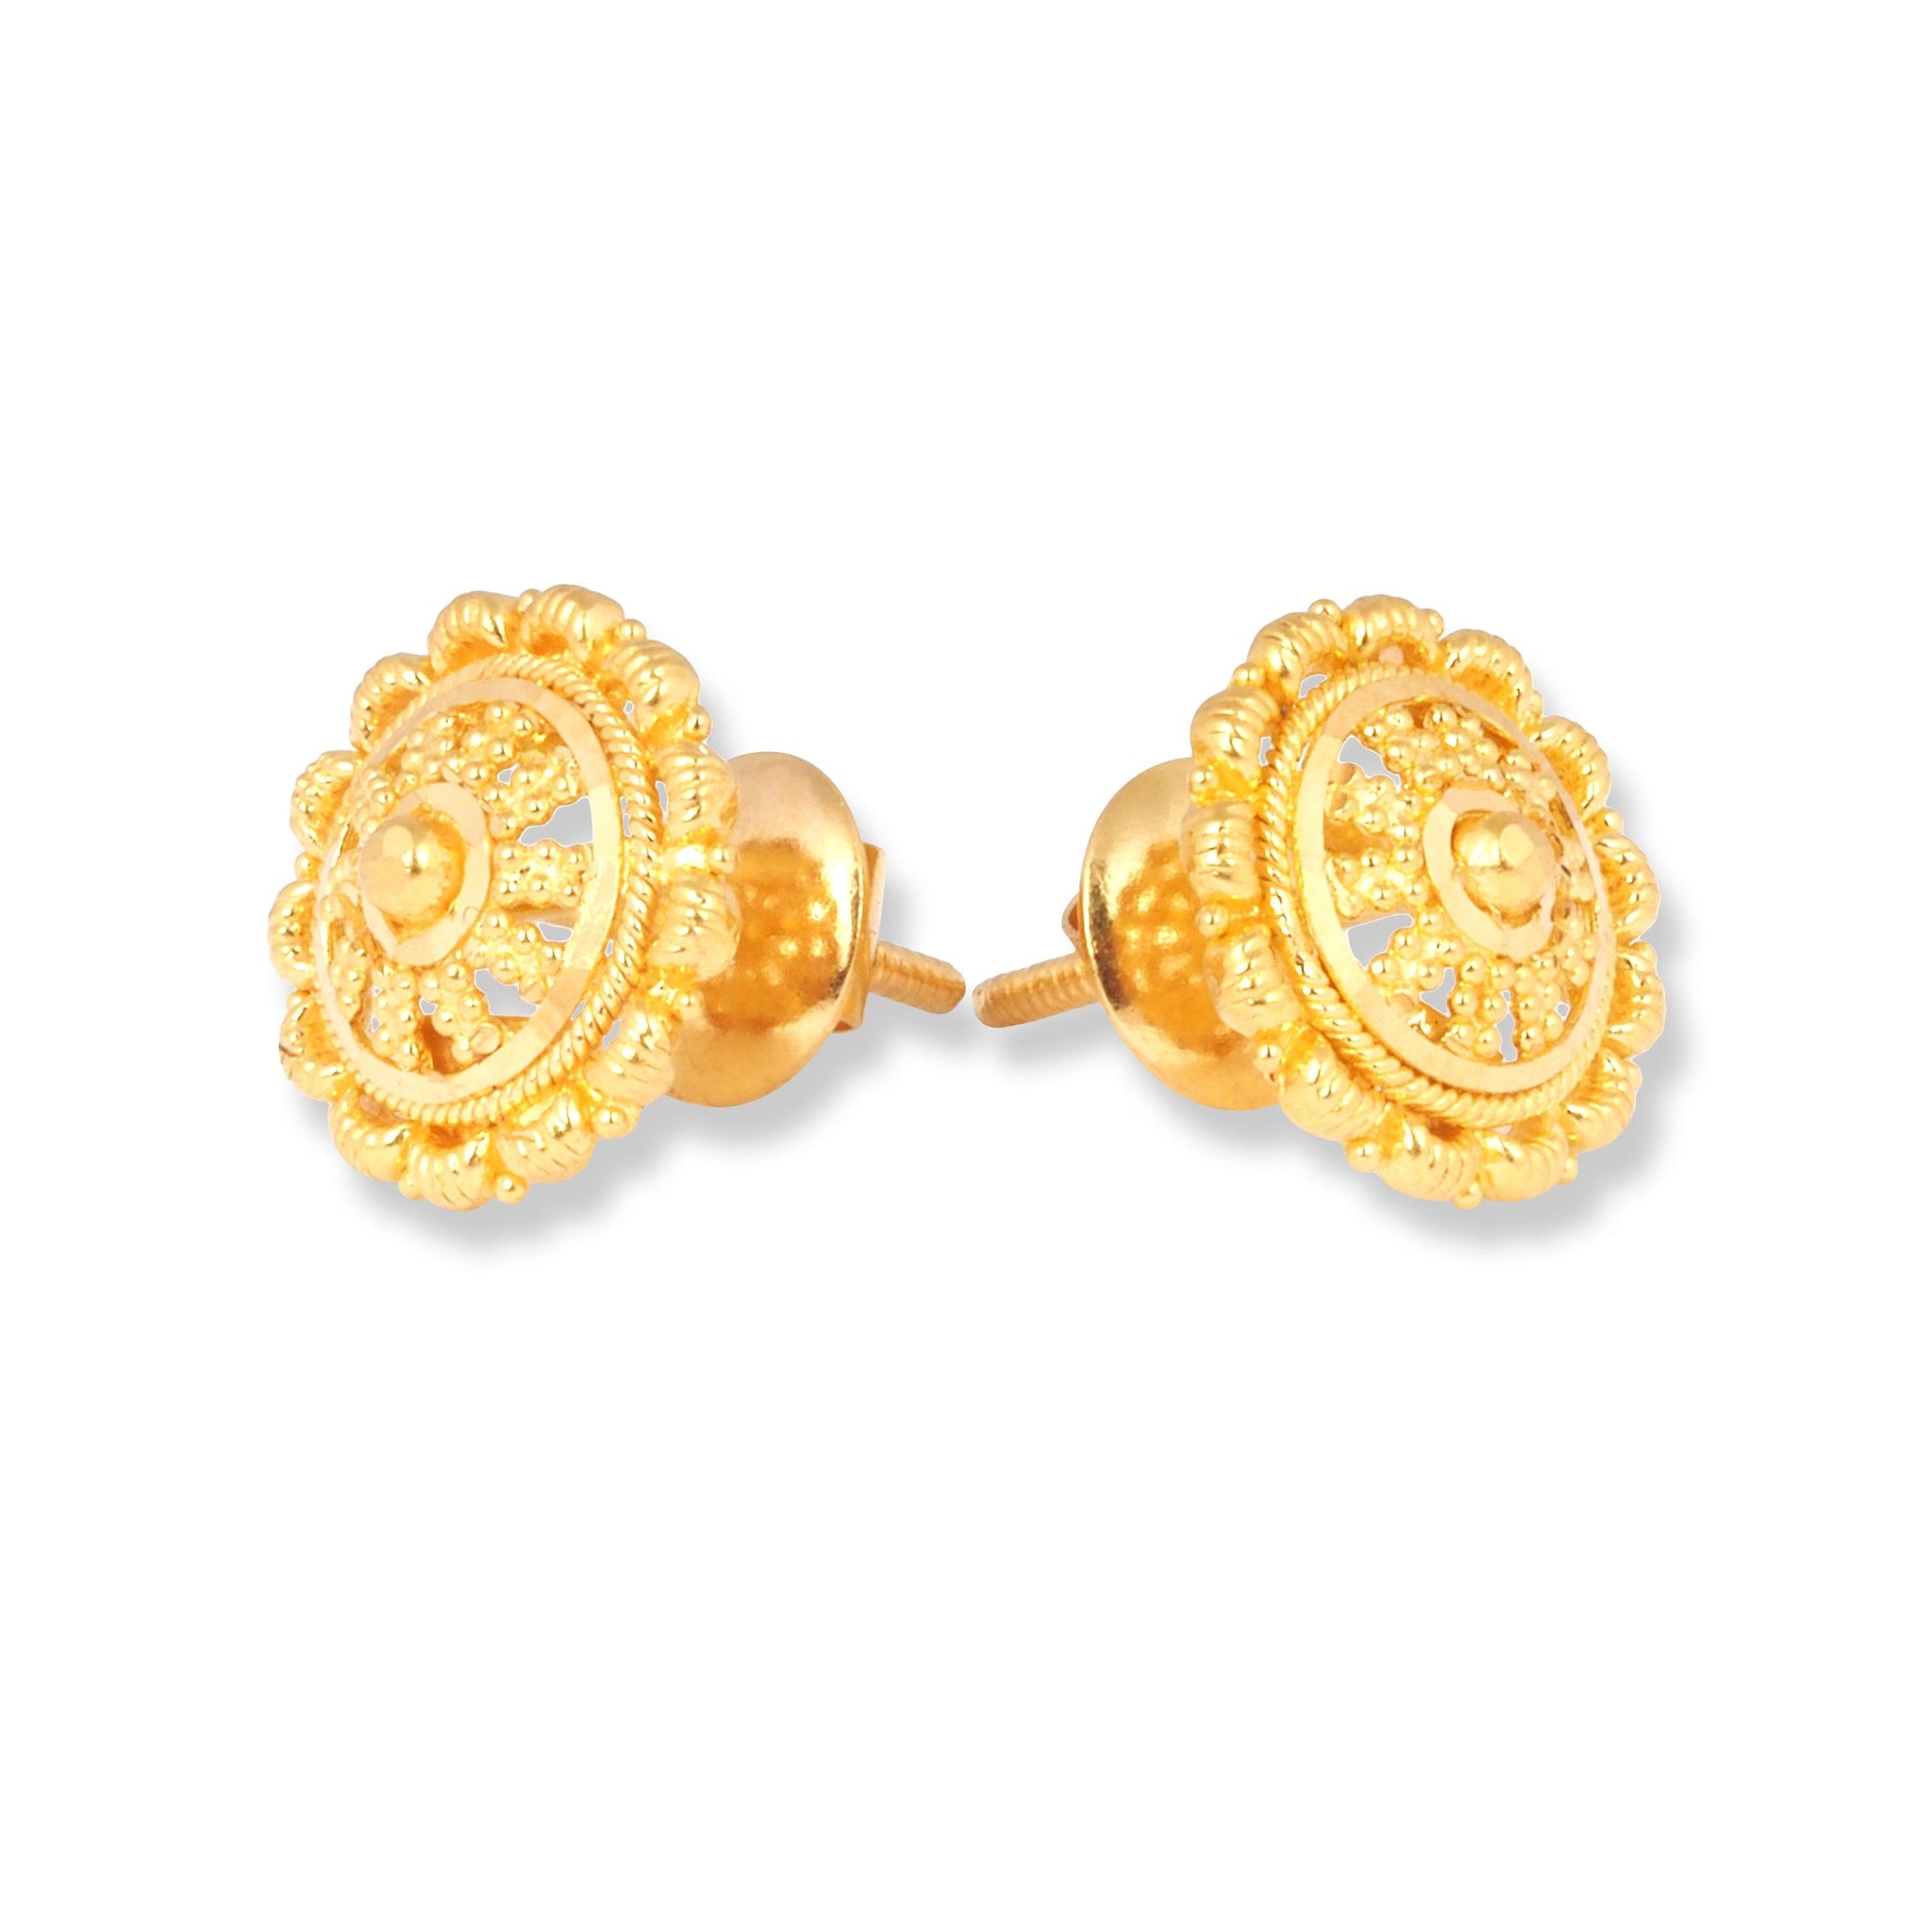 22ct Gold Earrings with Filigree Design (3.5g) E-7886